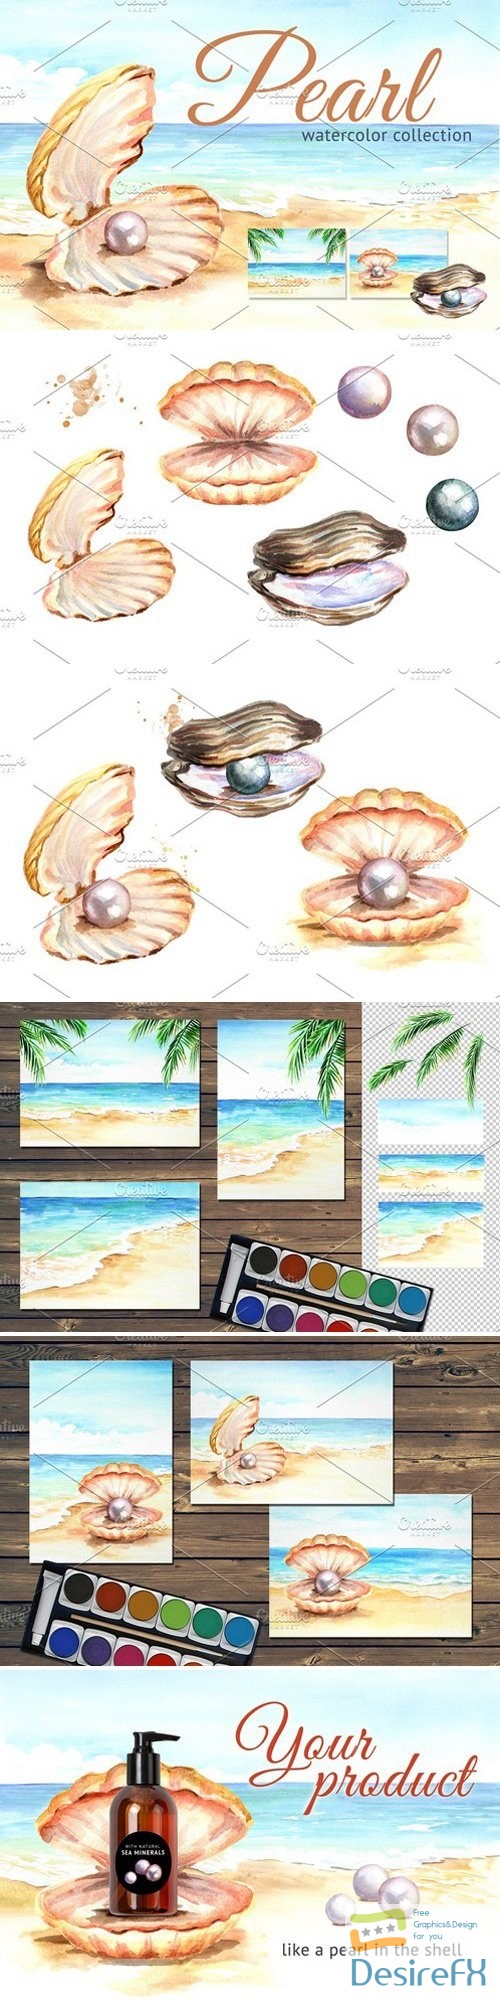 Pearls Watercolor collection 2340274